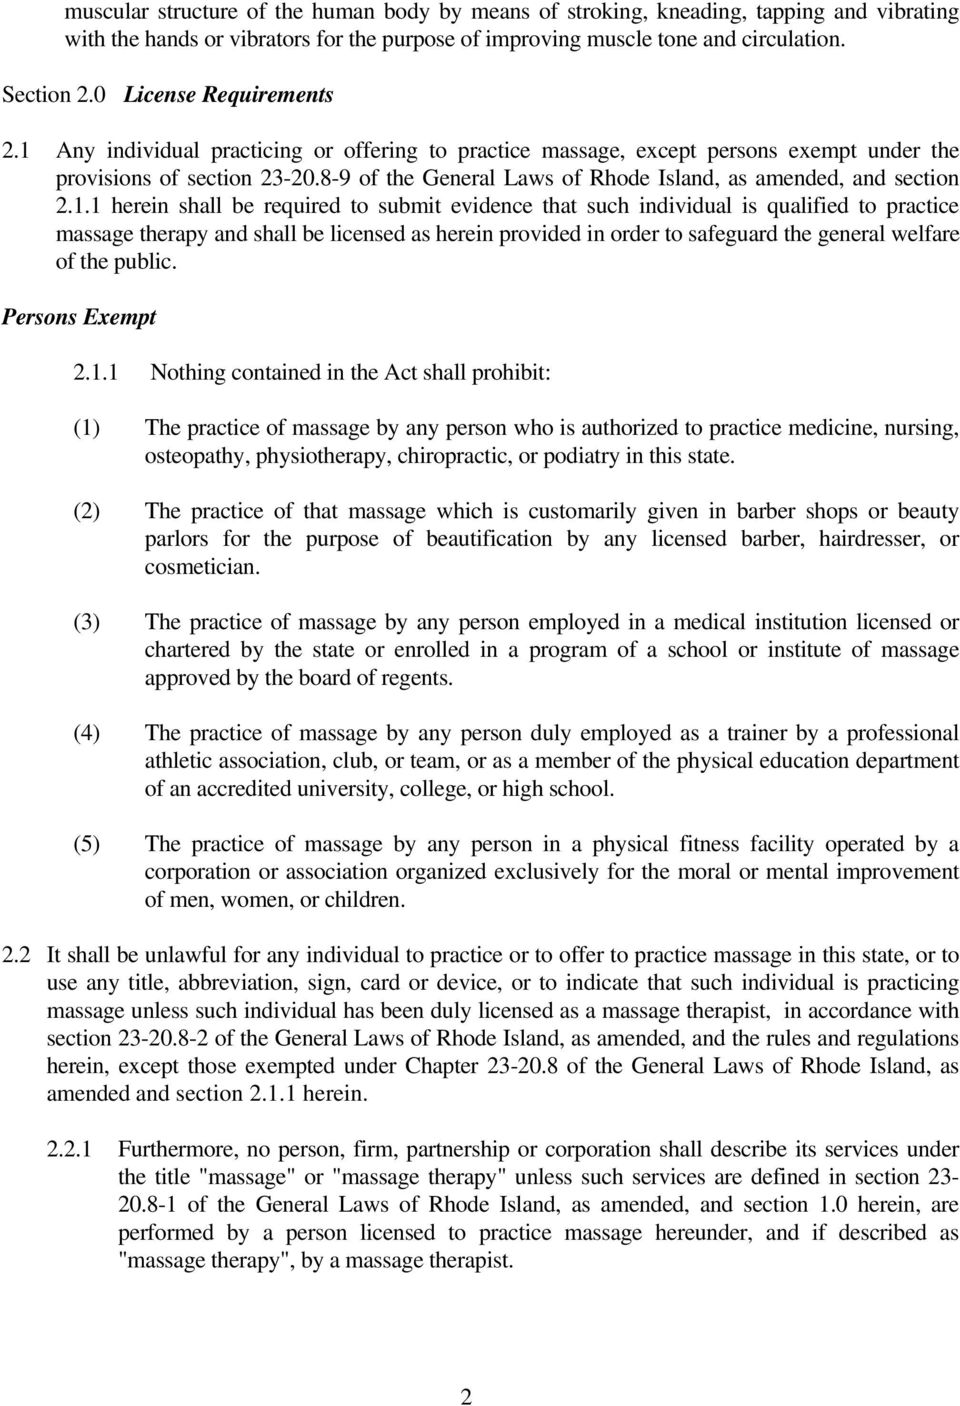 8-9 of the General Laws of Rhode Island, as amended, and section 2.1.